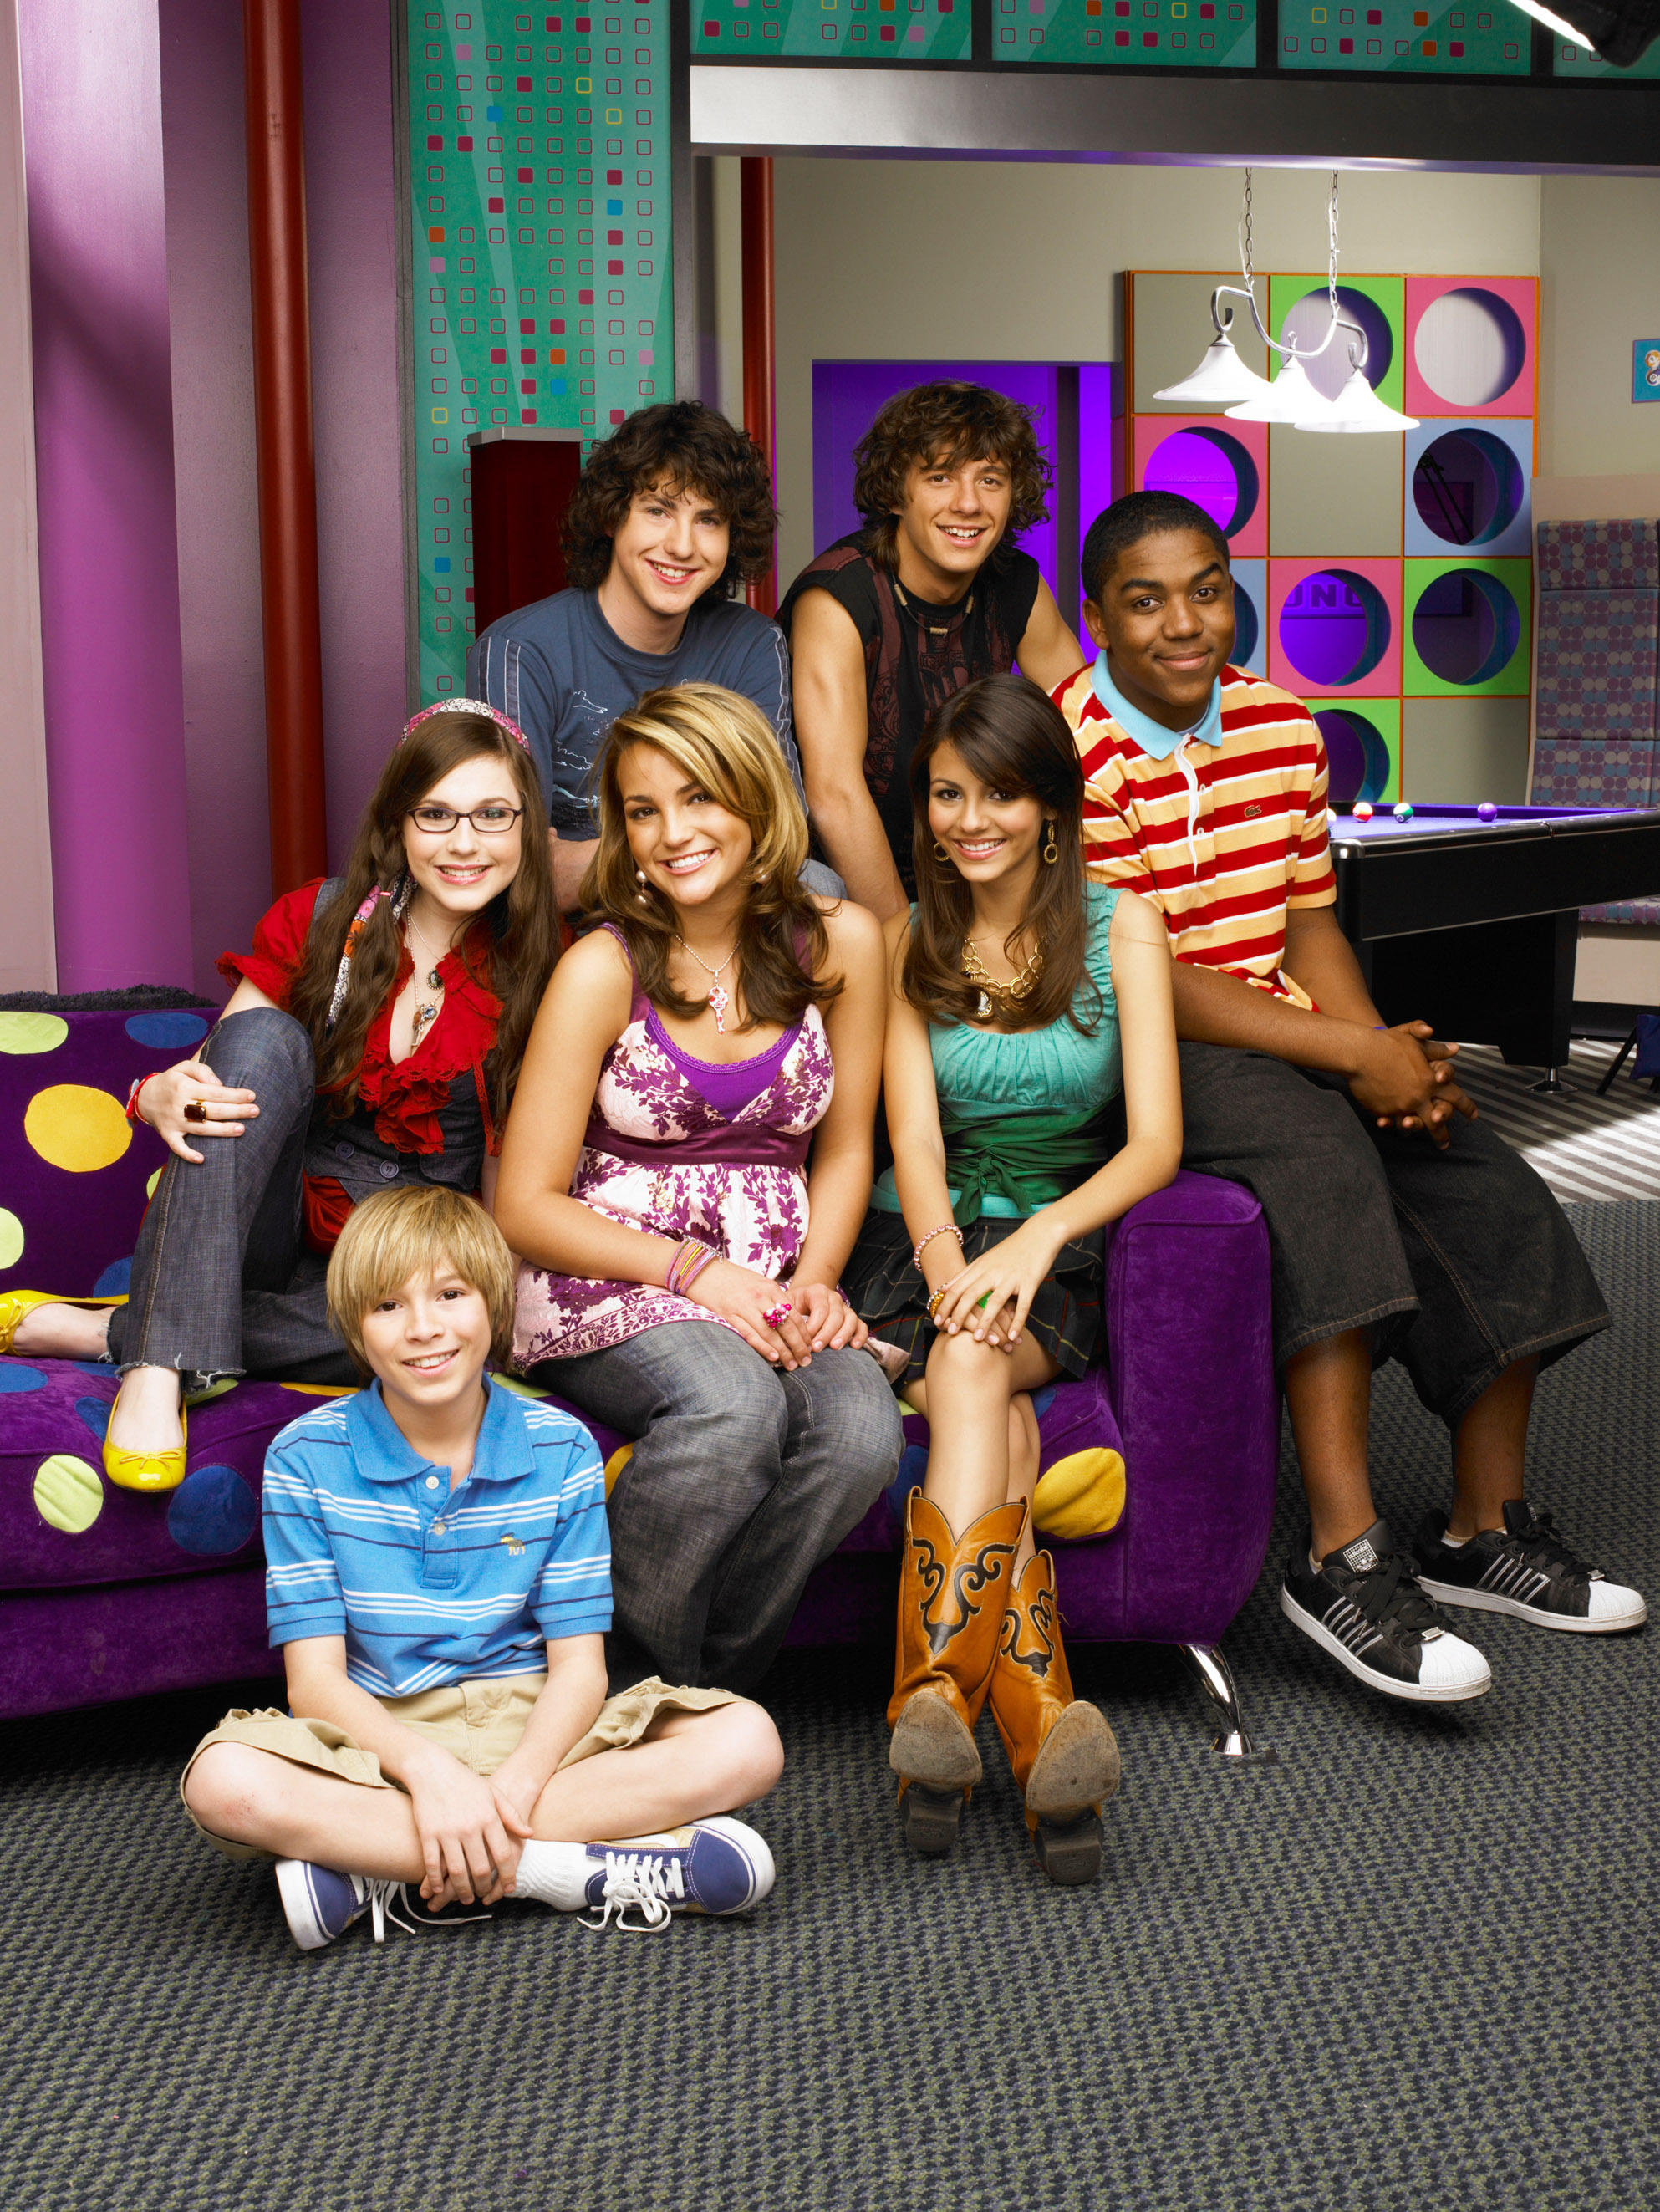 Most of the cast of Zoey 101 reprised their roles on Paramount's sequel Zoey 102